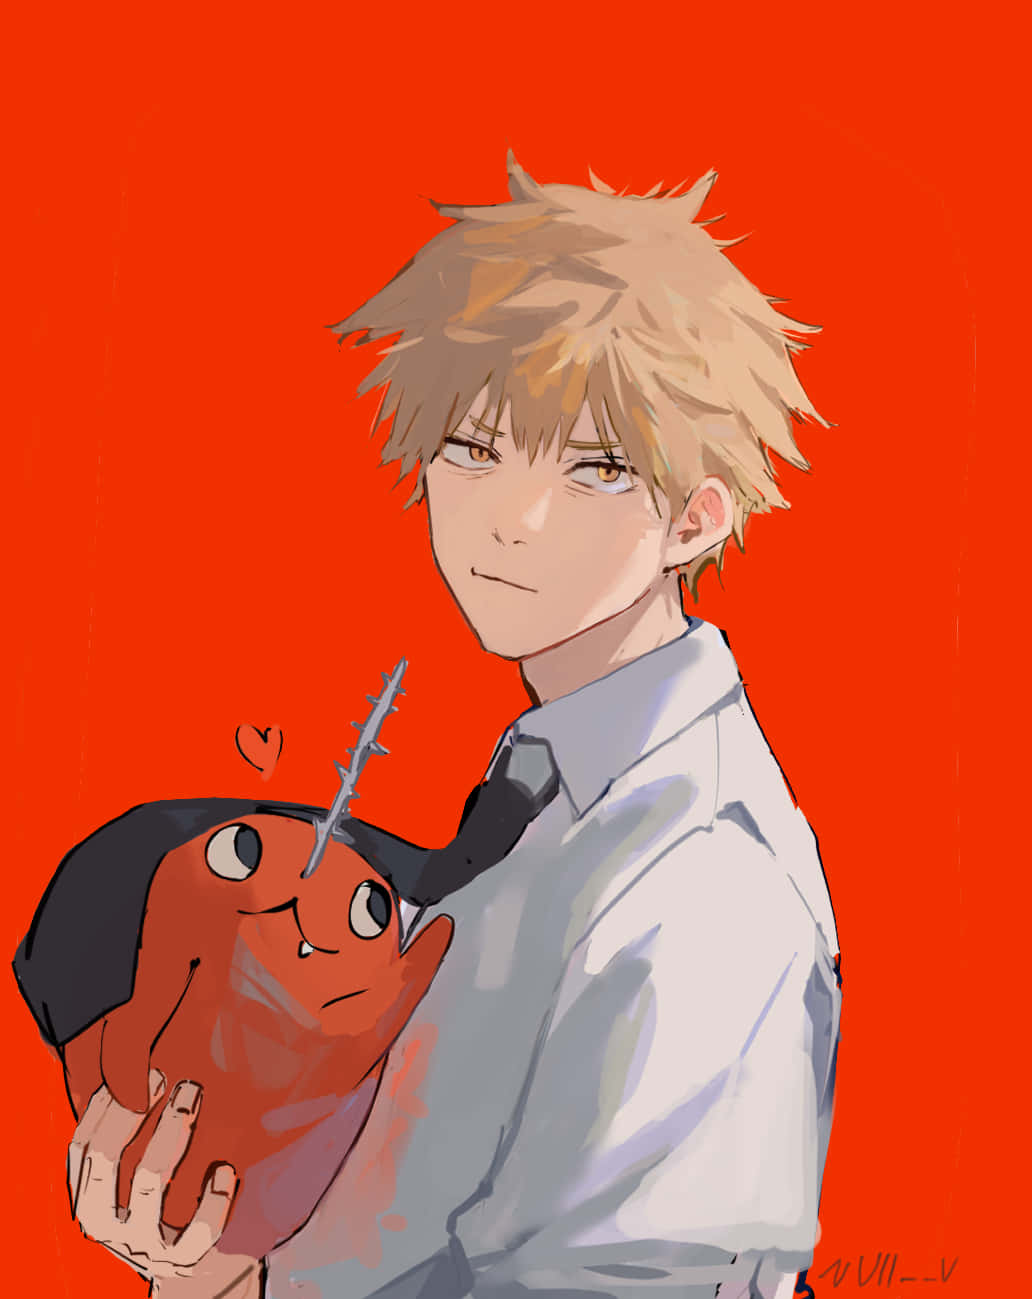 A Boy Holding A Red Stuffed Animal